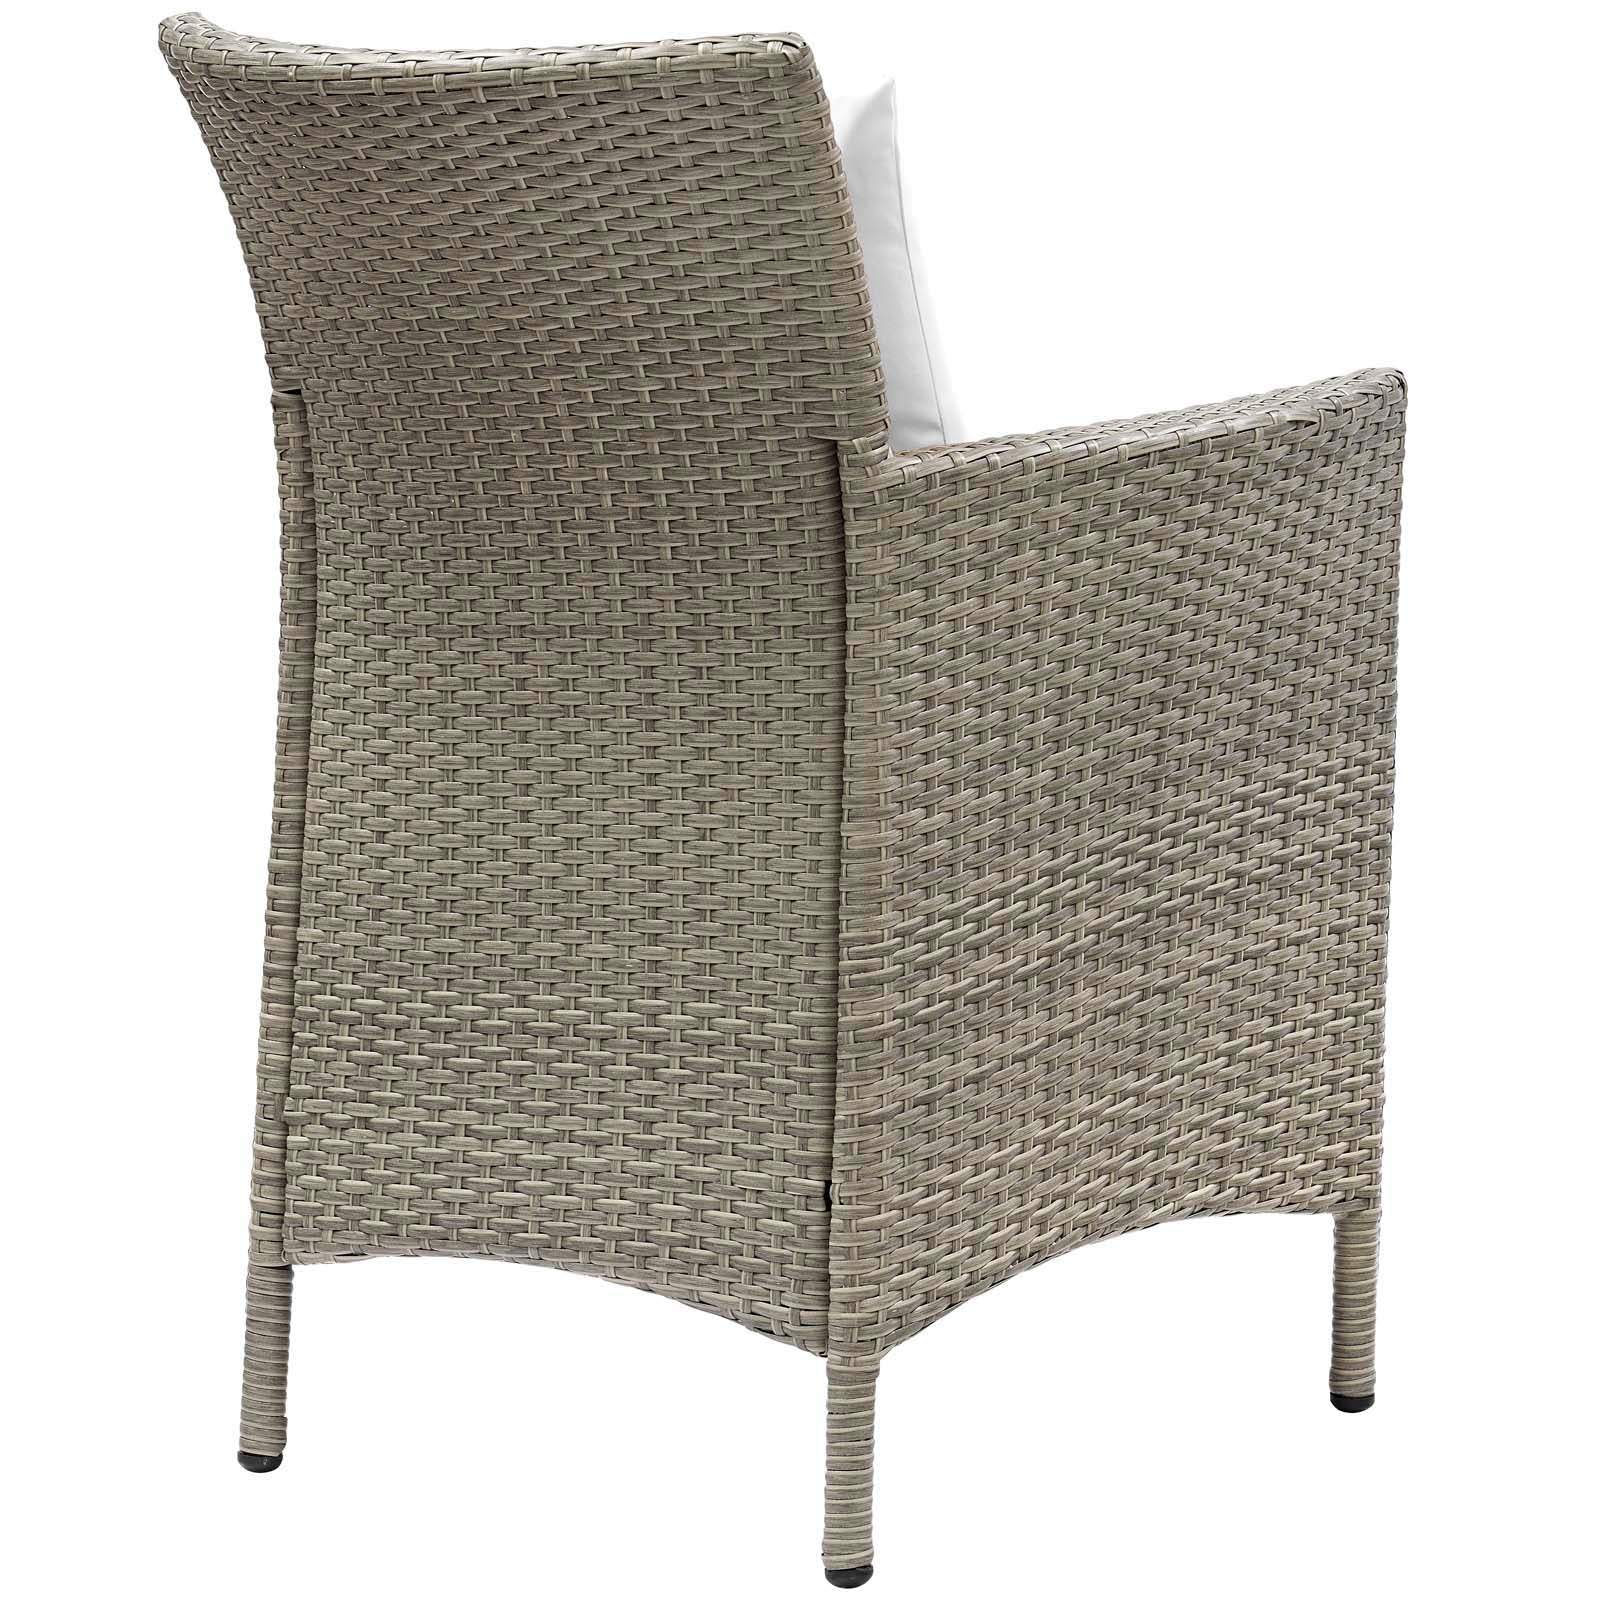 Modway Outdoor Dining Chairs - Conduit Outdoor Patio Wicker Rattan Dining Armchair Set of 4 Light Gray White